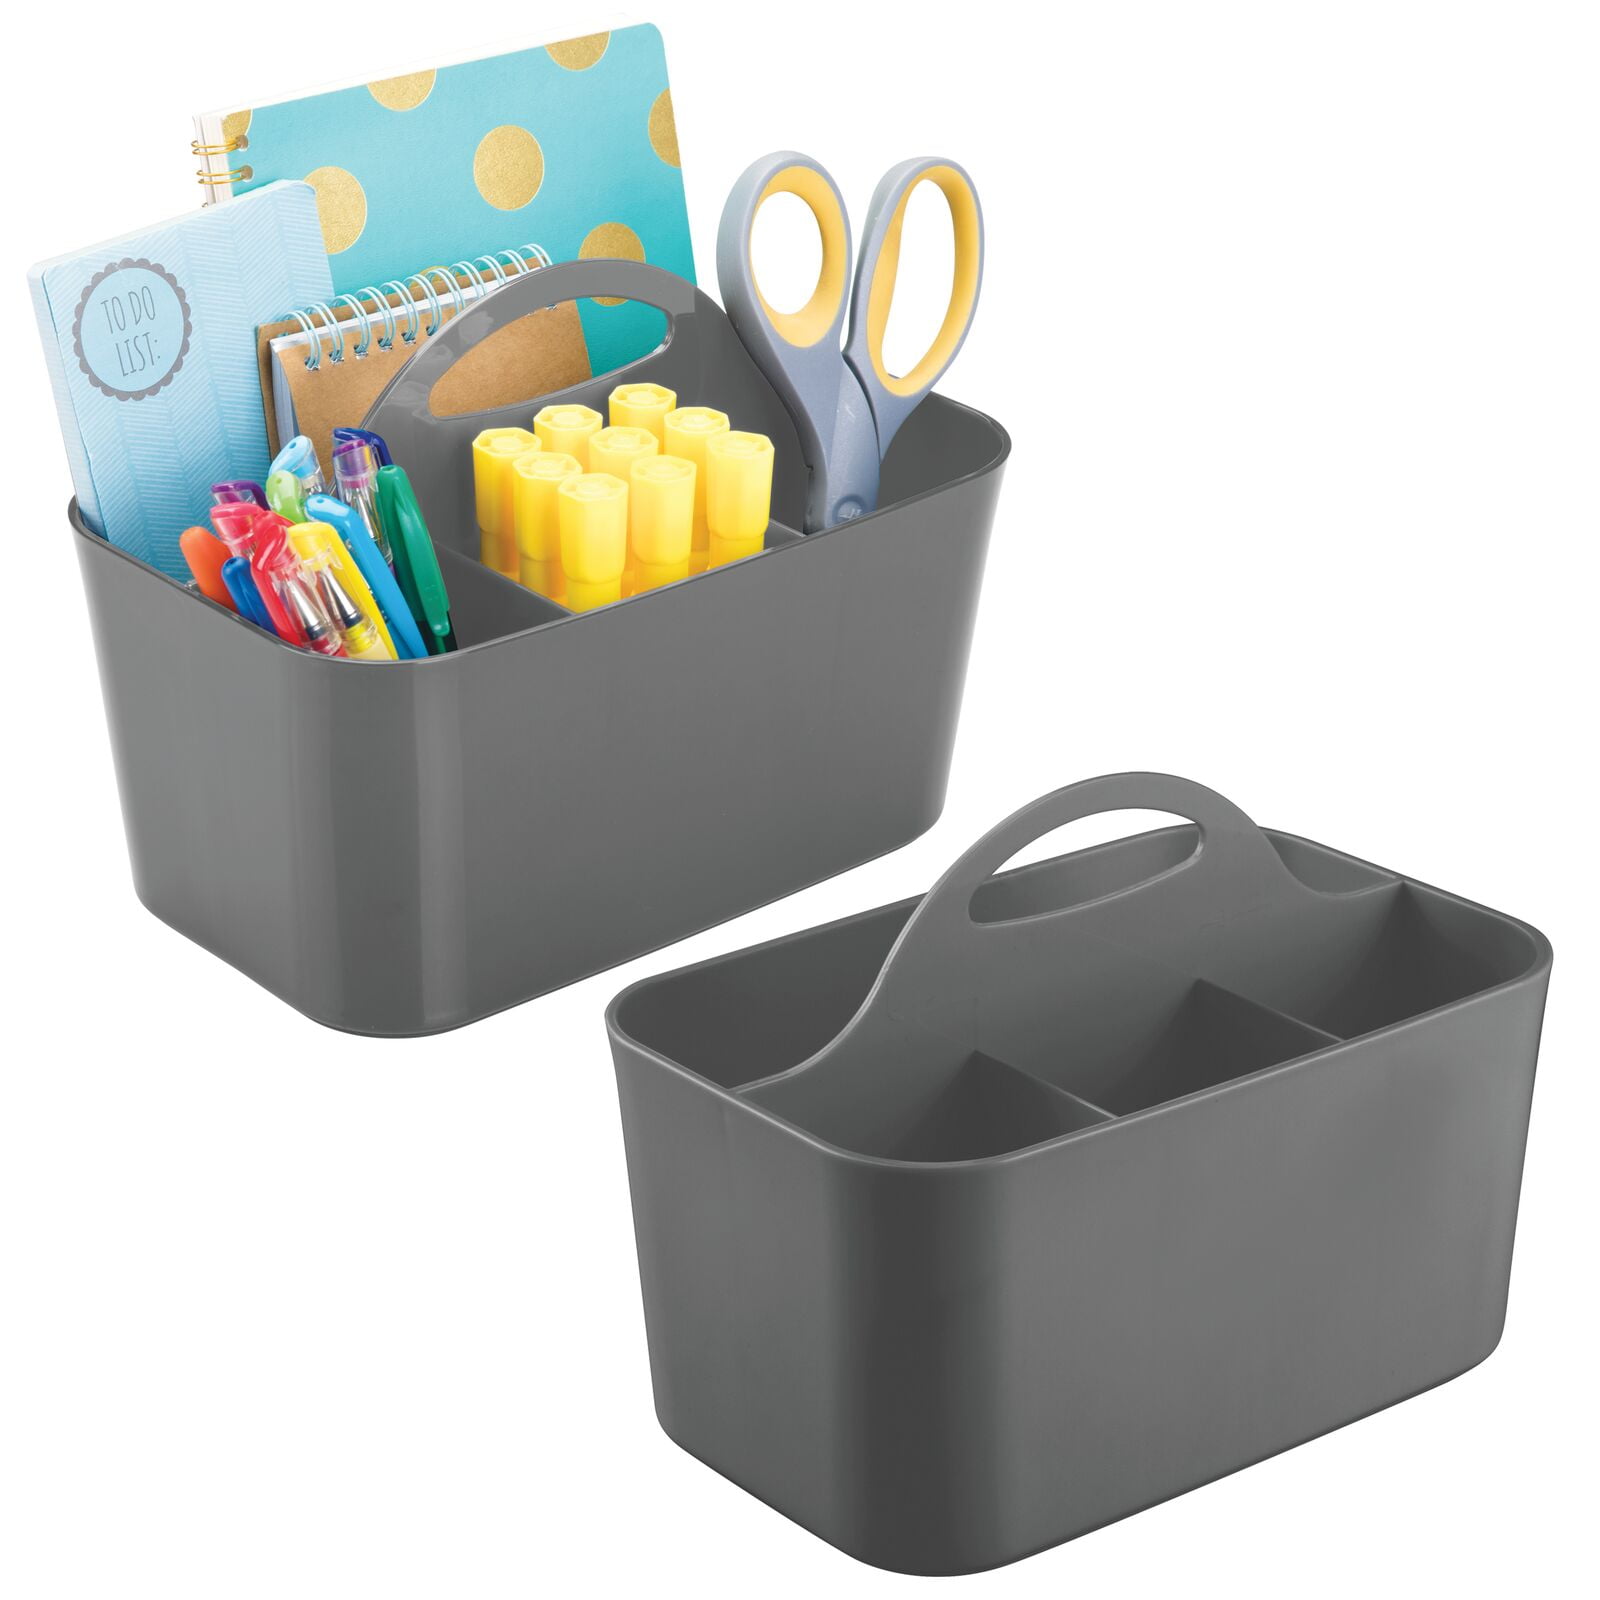 mDesign Large Plastic Divided Office Storage Organizer Caddy Tote with Handle for Cabinet Desk Workspace - Holds Desktop Supplies Pens Pencils Markers